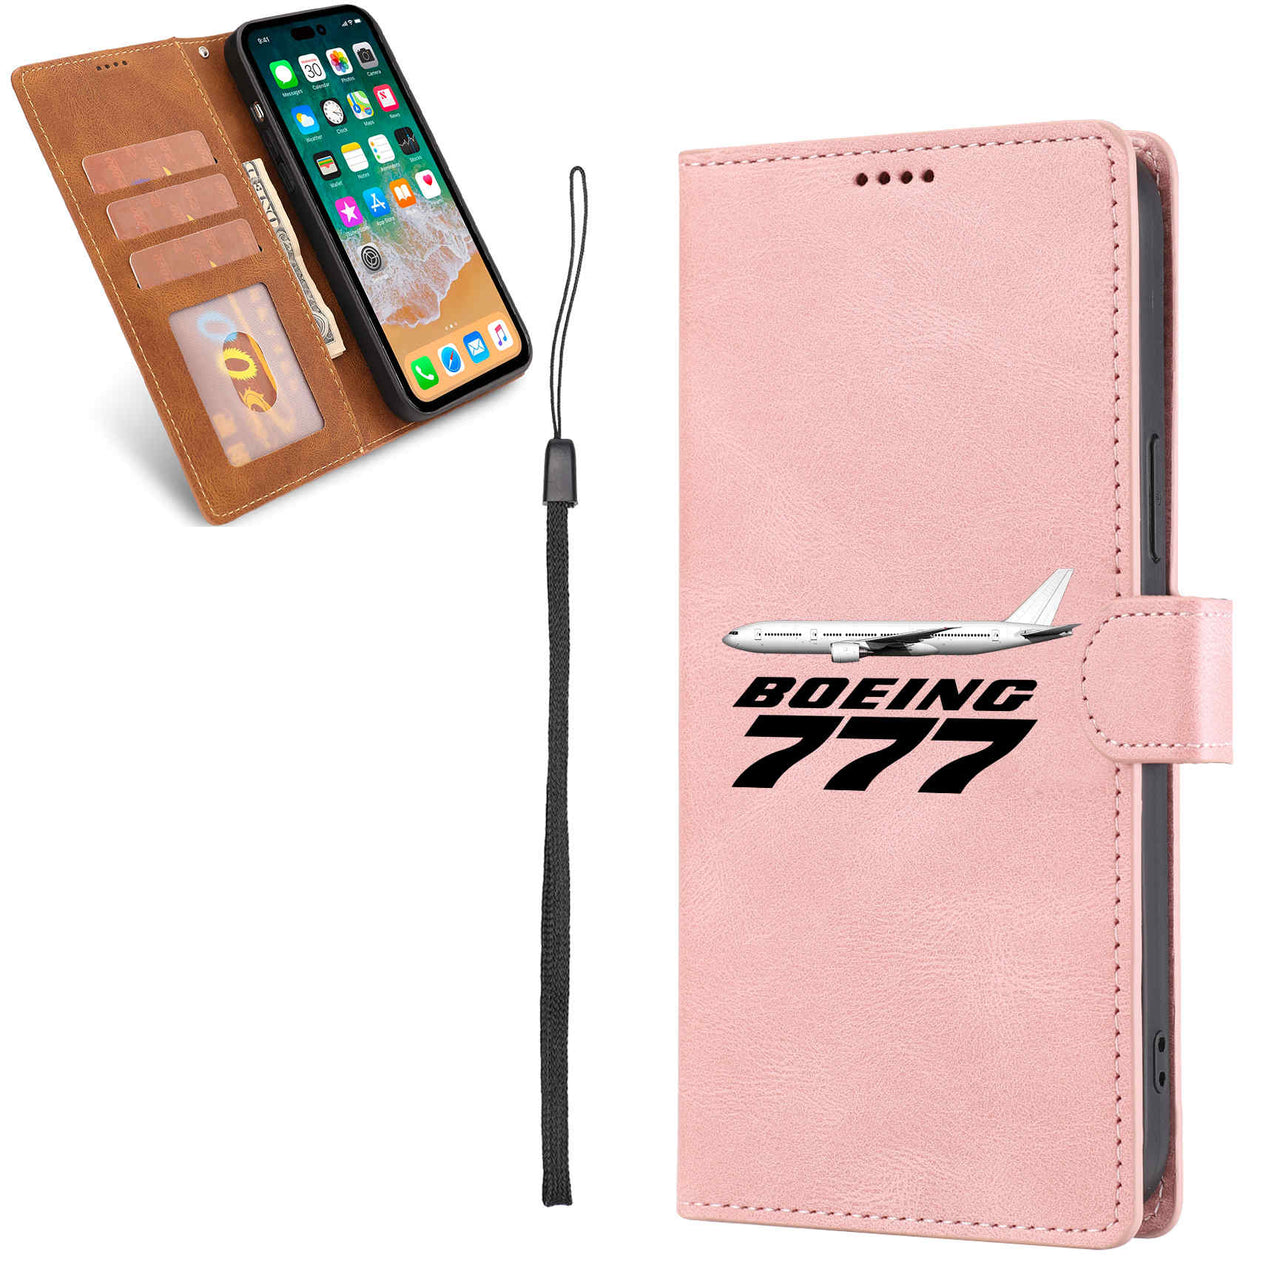 The Boeing 777 Leather Samsung A Cases